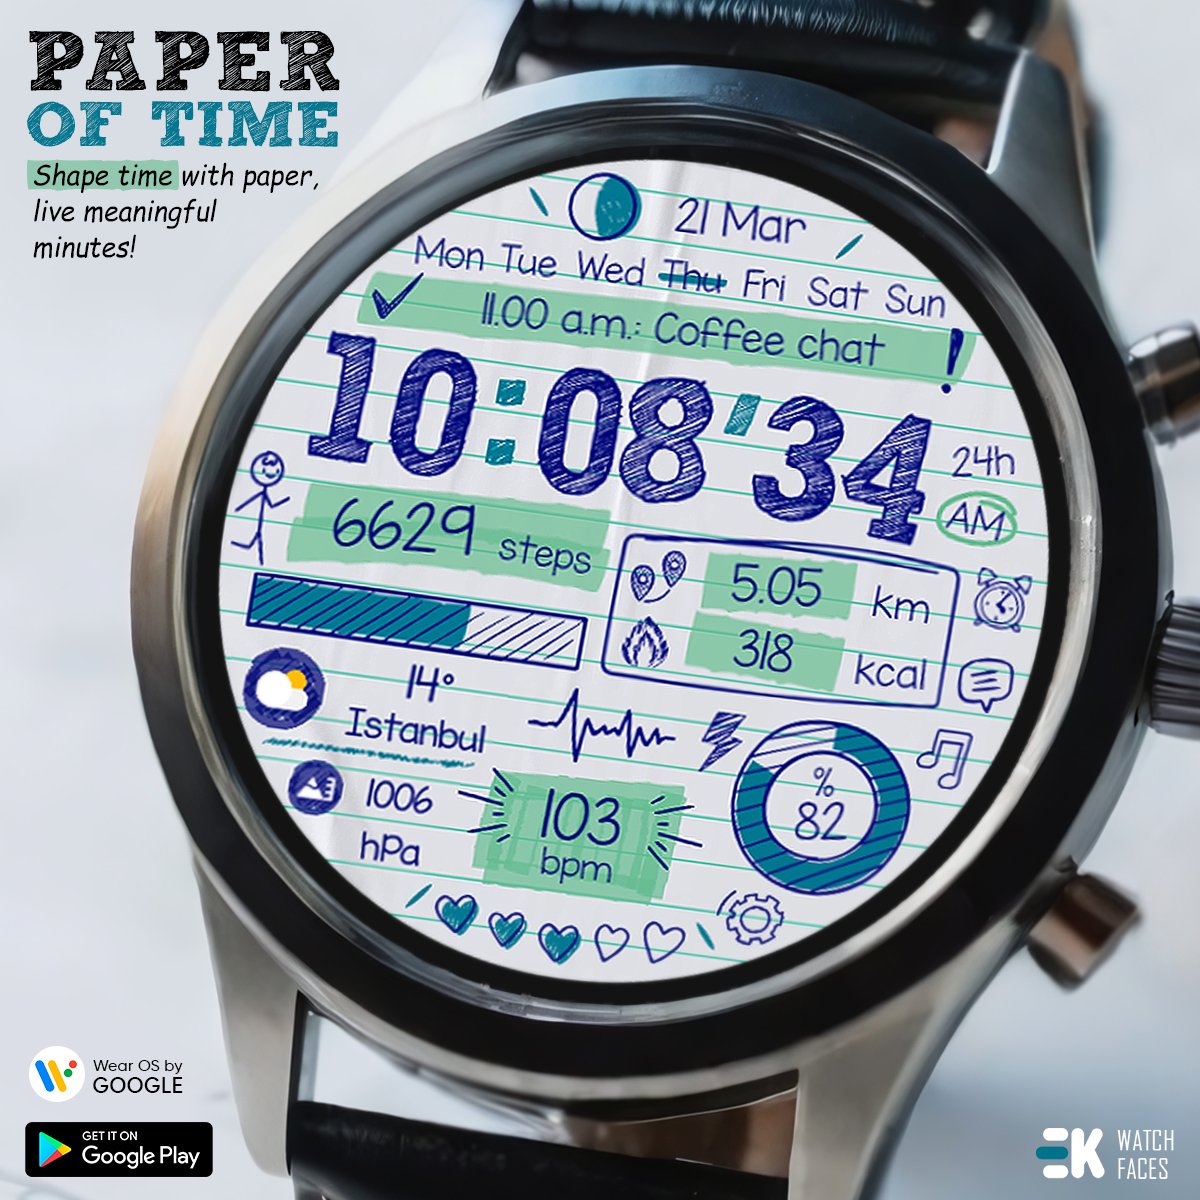 Shape time with paper, live meaningful minutes!⌚🖋️📃

Watch: play.google.com/store/apps/det…
Other Watches: play.google.com/store/apps/dev…

#ticwatch #wearosface #watchfaces #wearosbygoogle #galaxywatch4 #galaxywatch5 #galaxywatch6 #androidwear #googleplay #suunto7 #fossilwear #Android